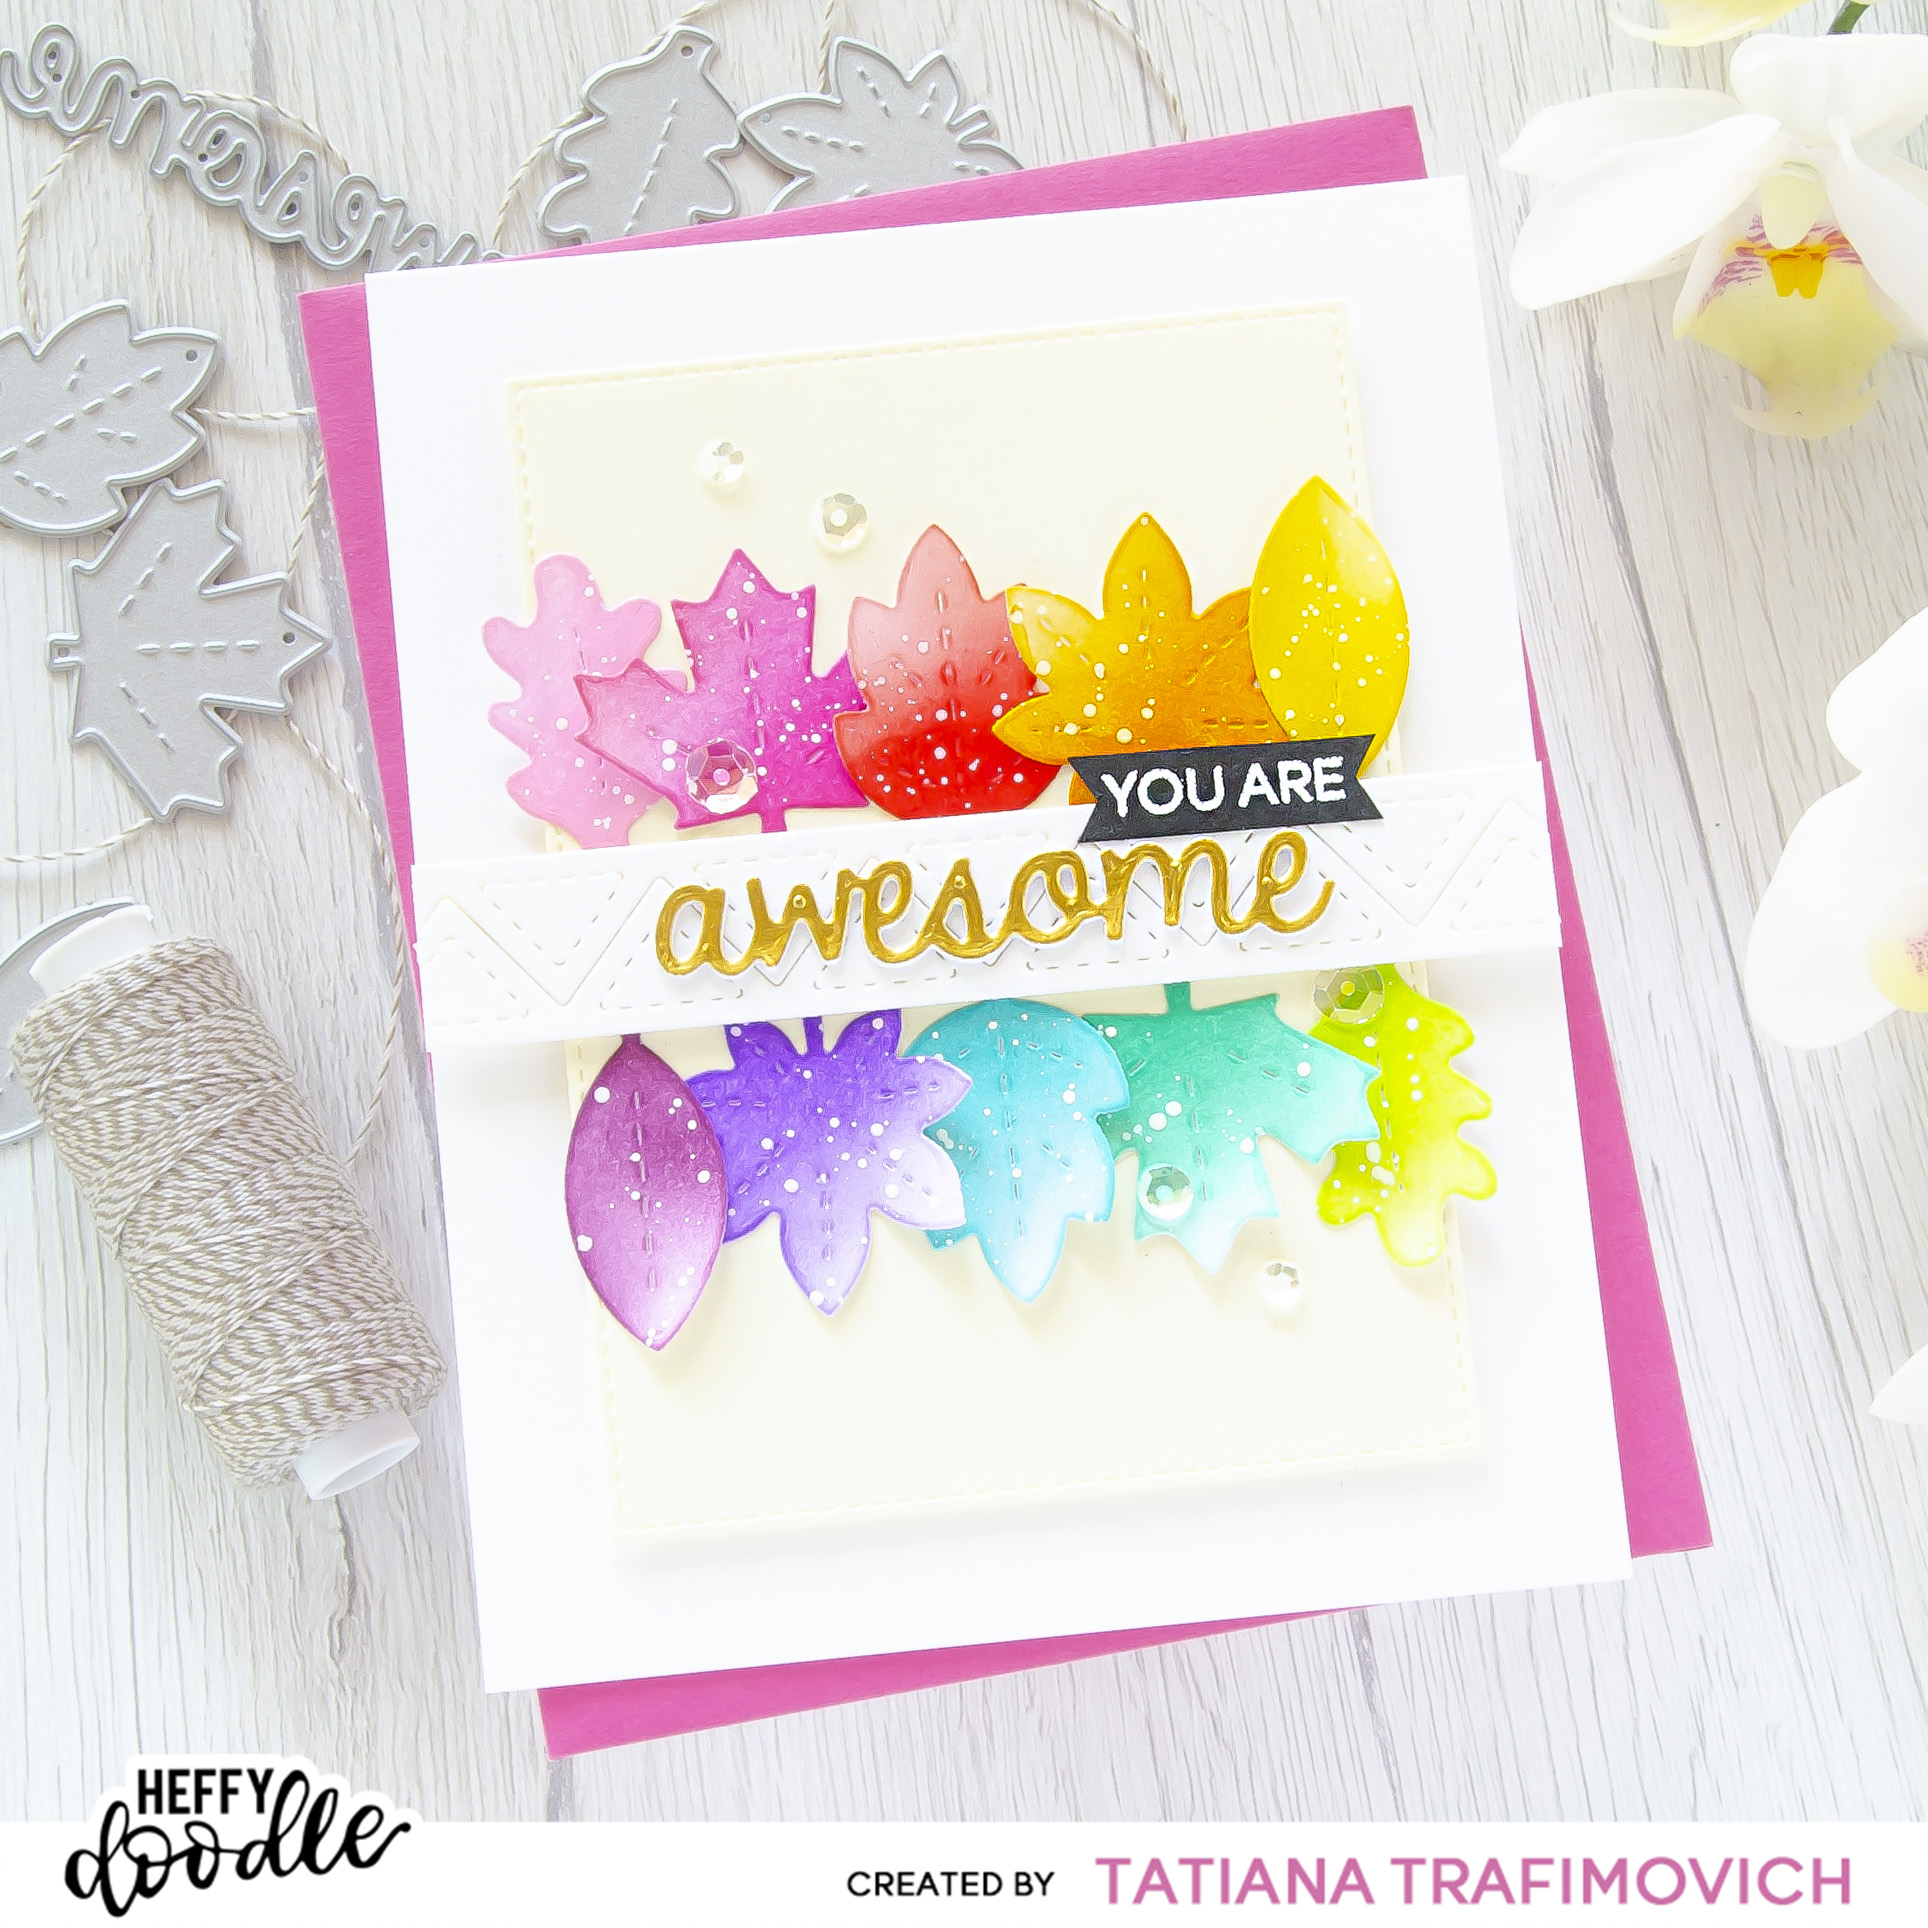 You Are Awesome #handmade card by Tatiana Trafimovich #tatianacraftandart - Forest Leaves Dies by Heffy Doodle #heffydoodle